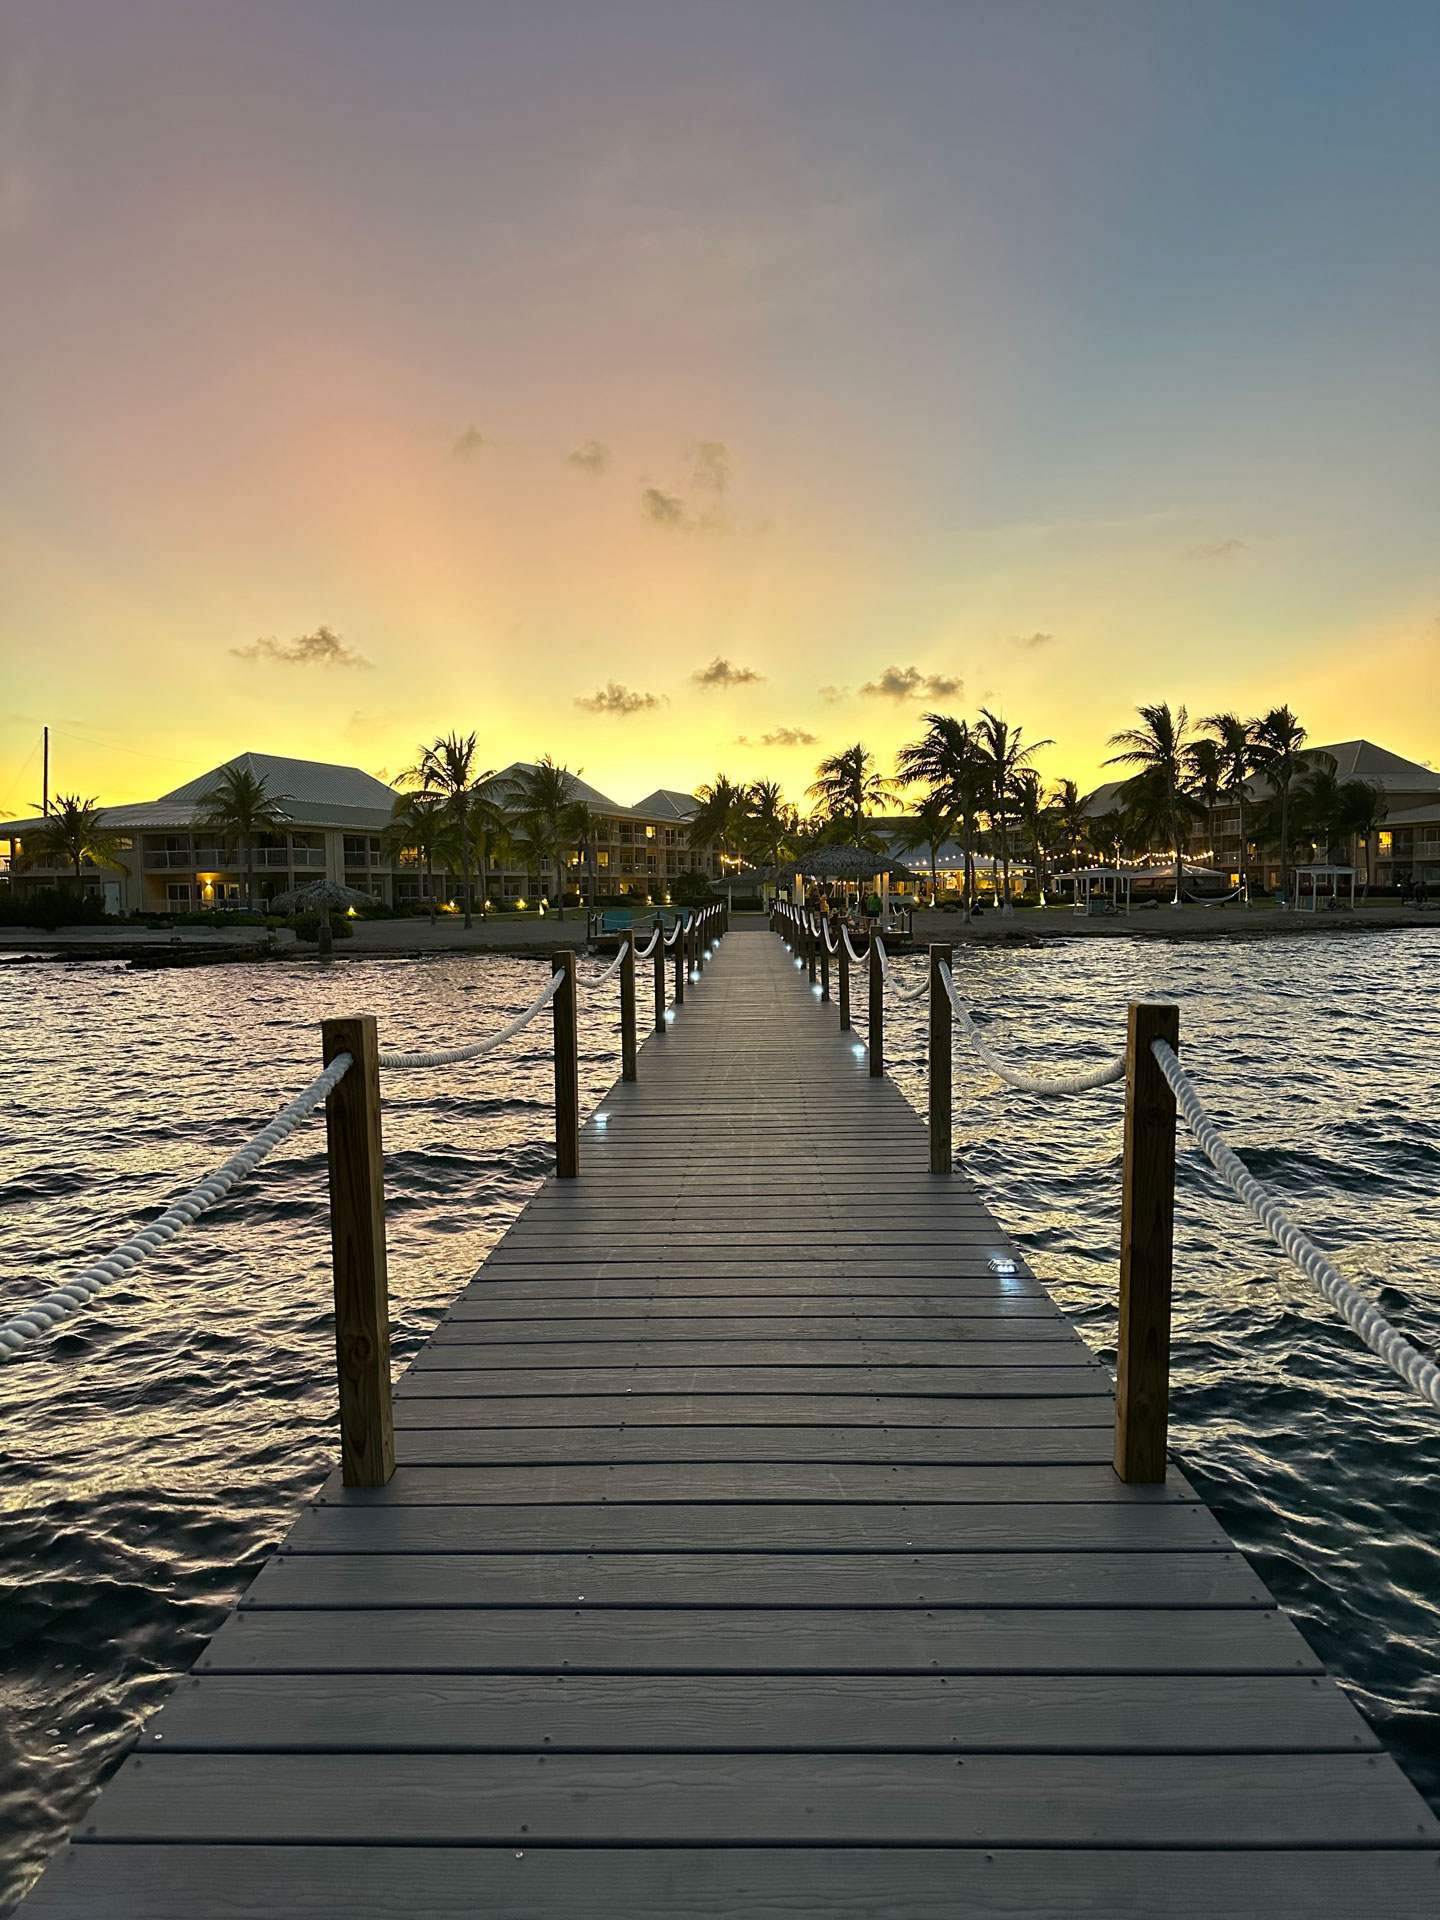 Sunset at the Grand Caymanian Resort pier.